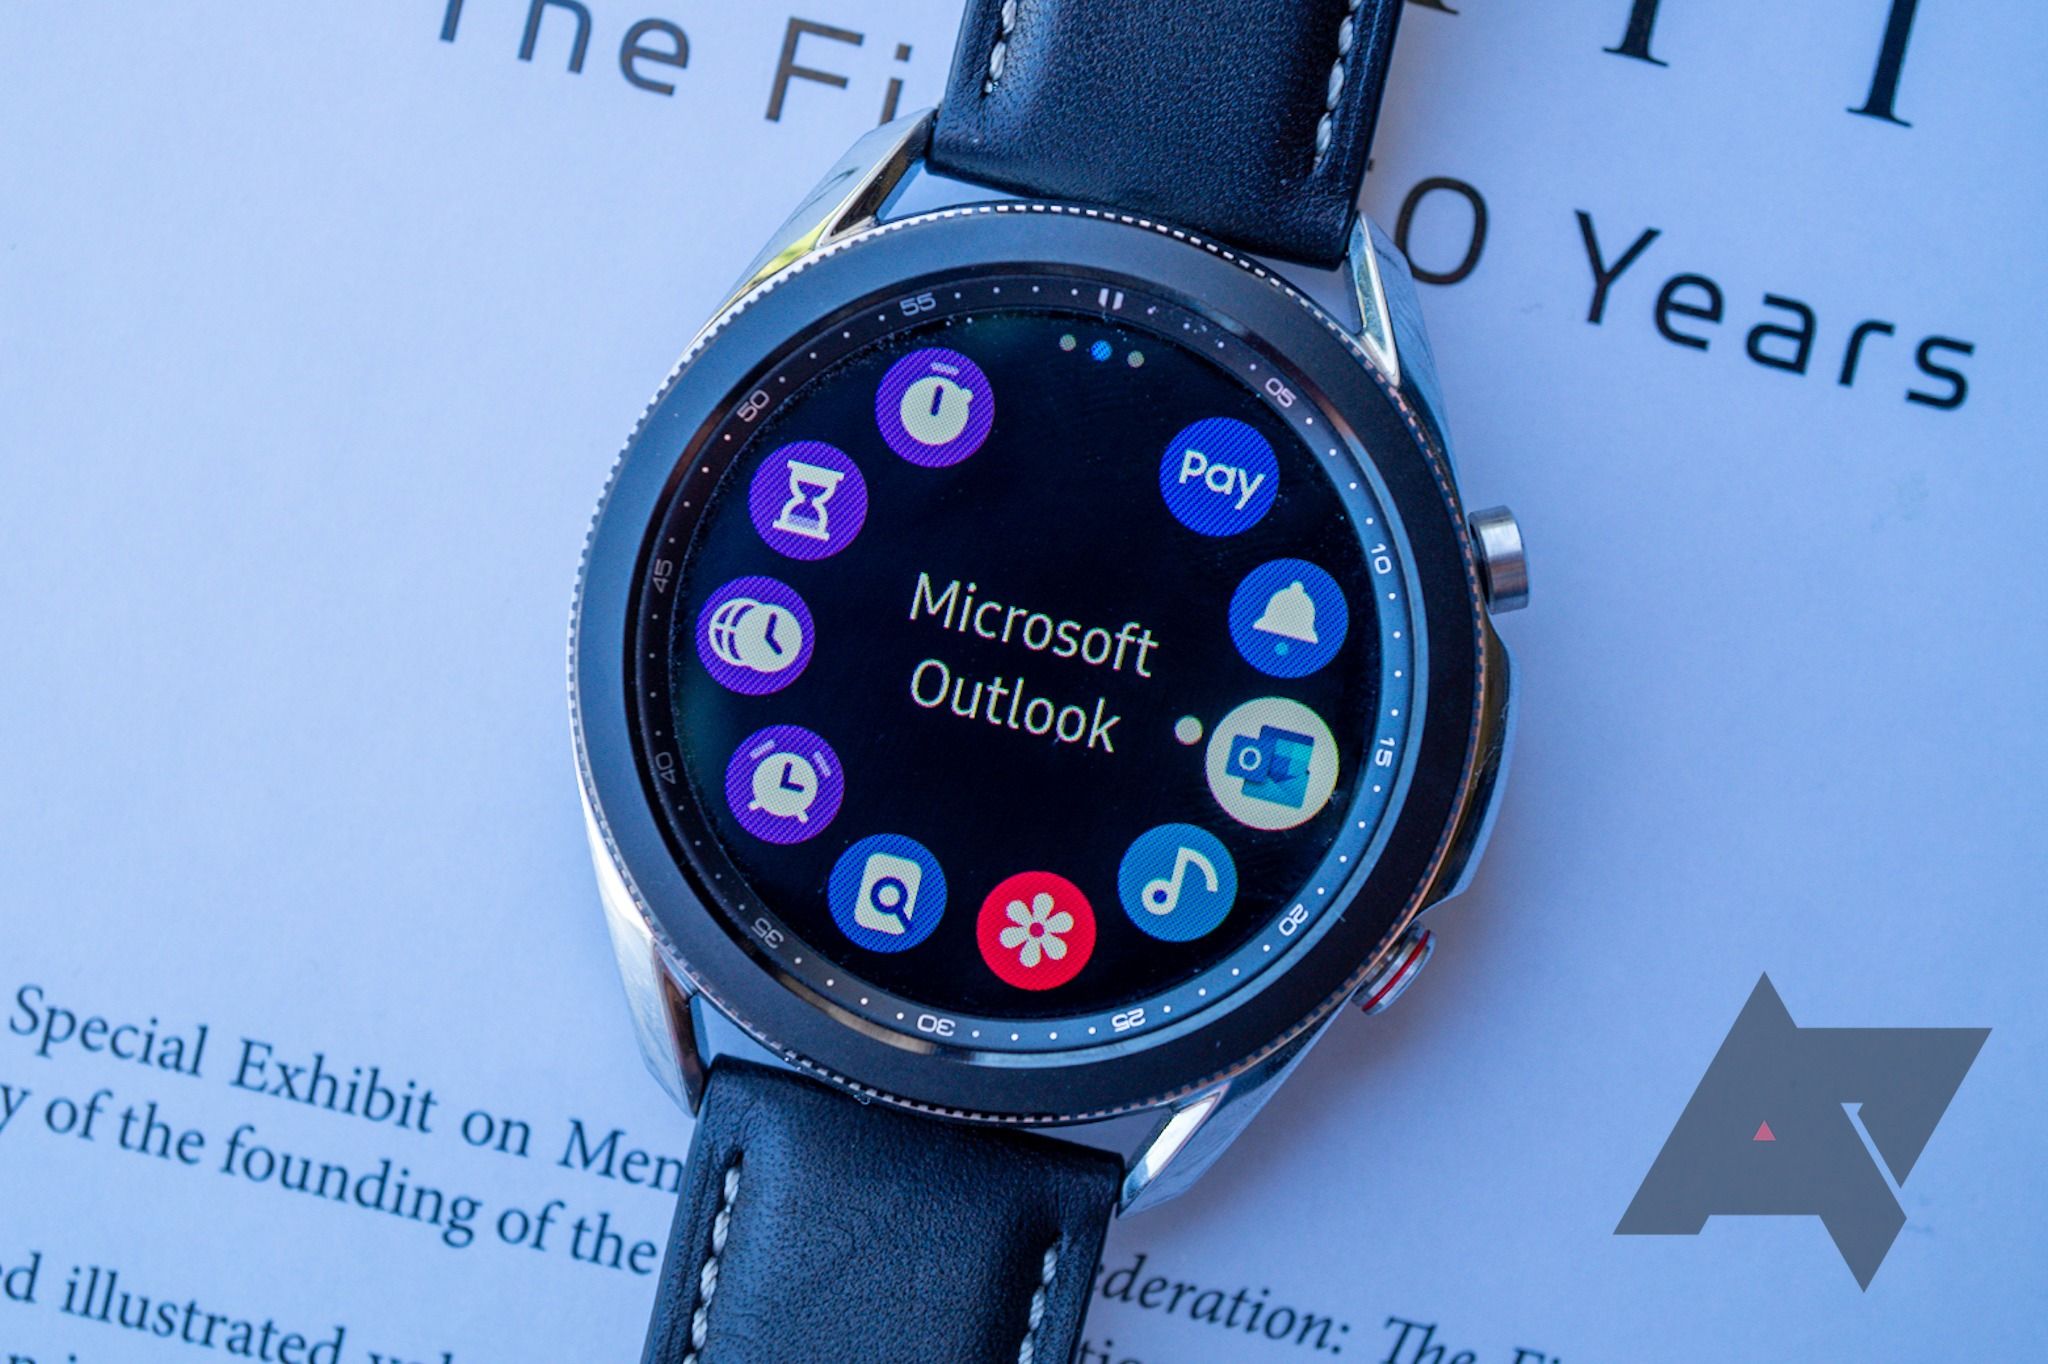 Five apps you should try on your Samsung Galaxy Watch